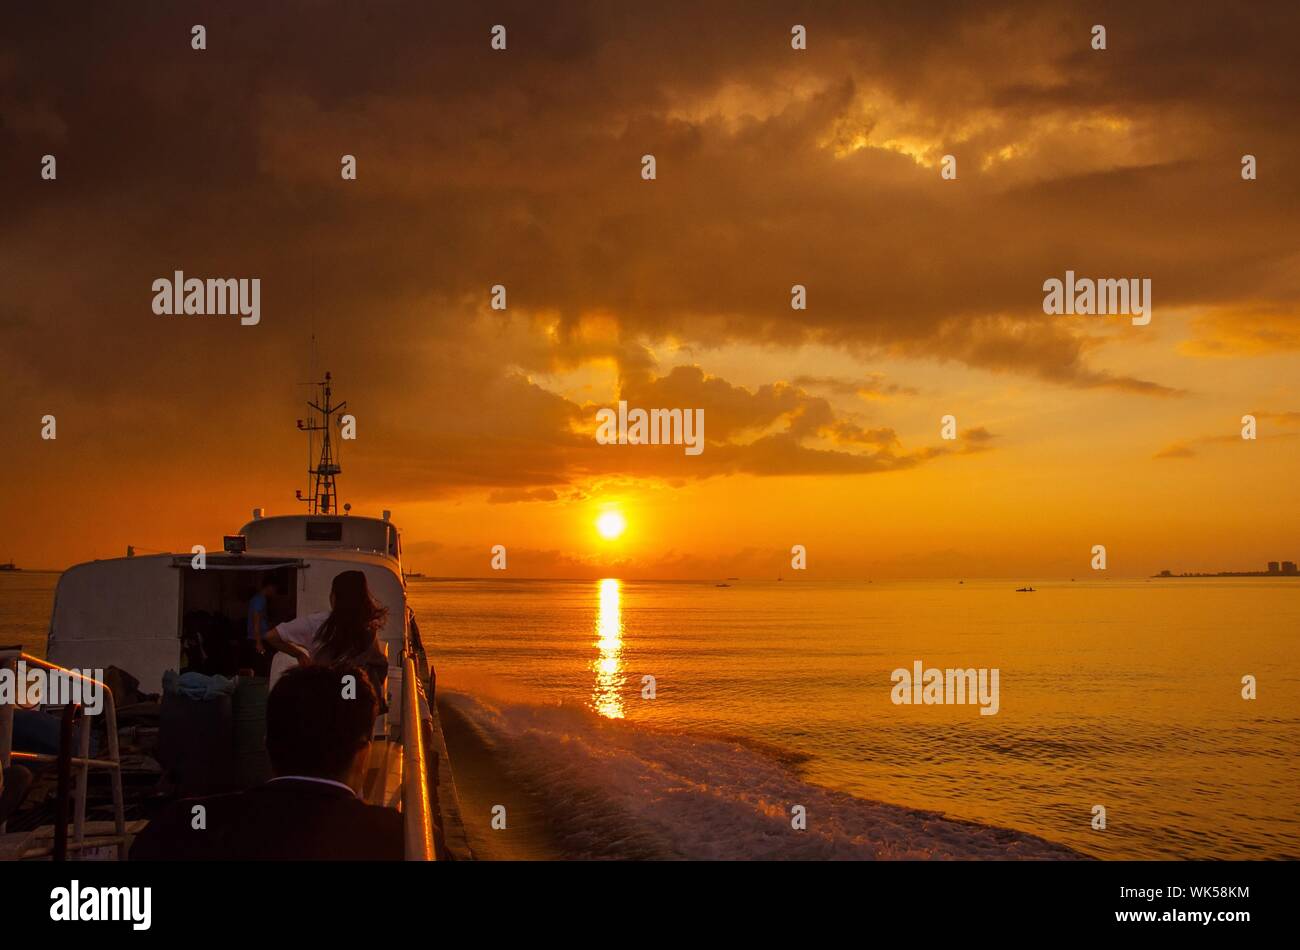 Tourists In Boat On Sea During Sunset Stock Photo